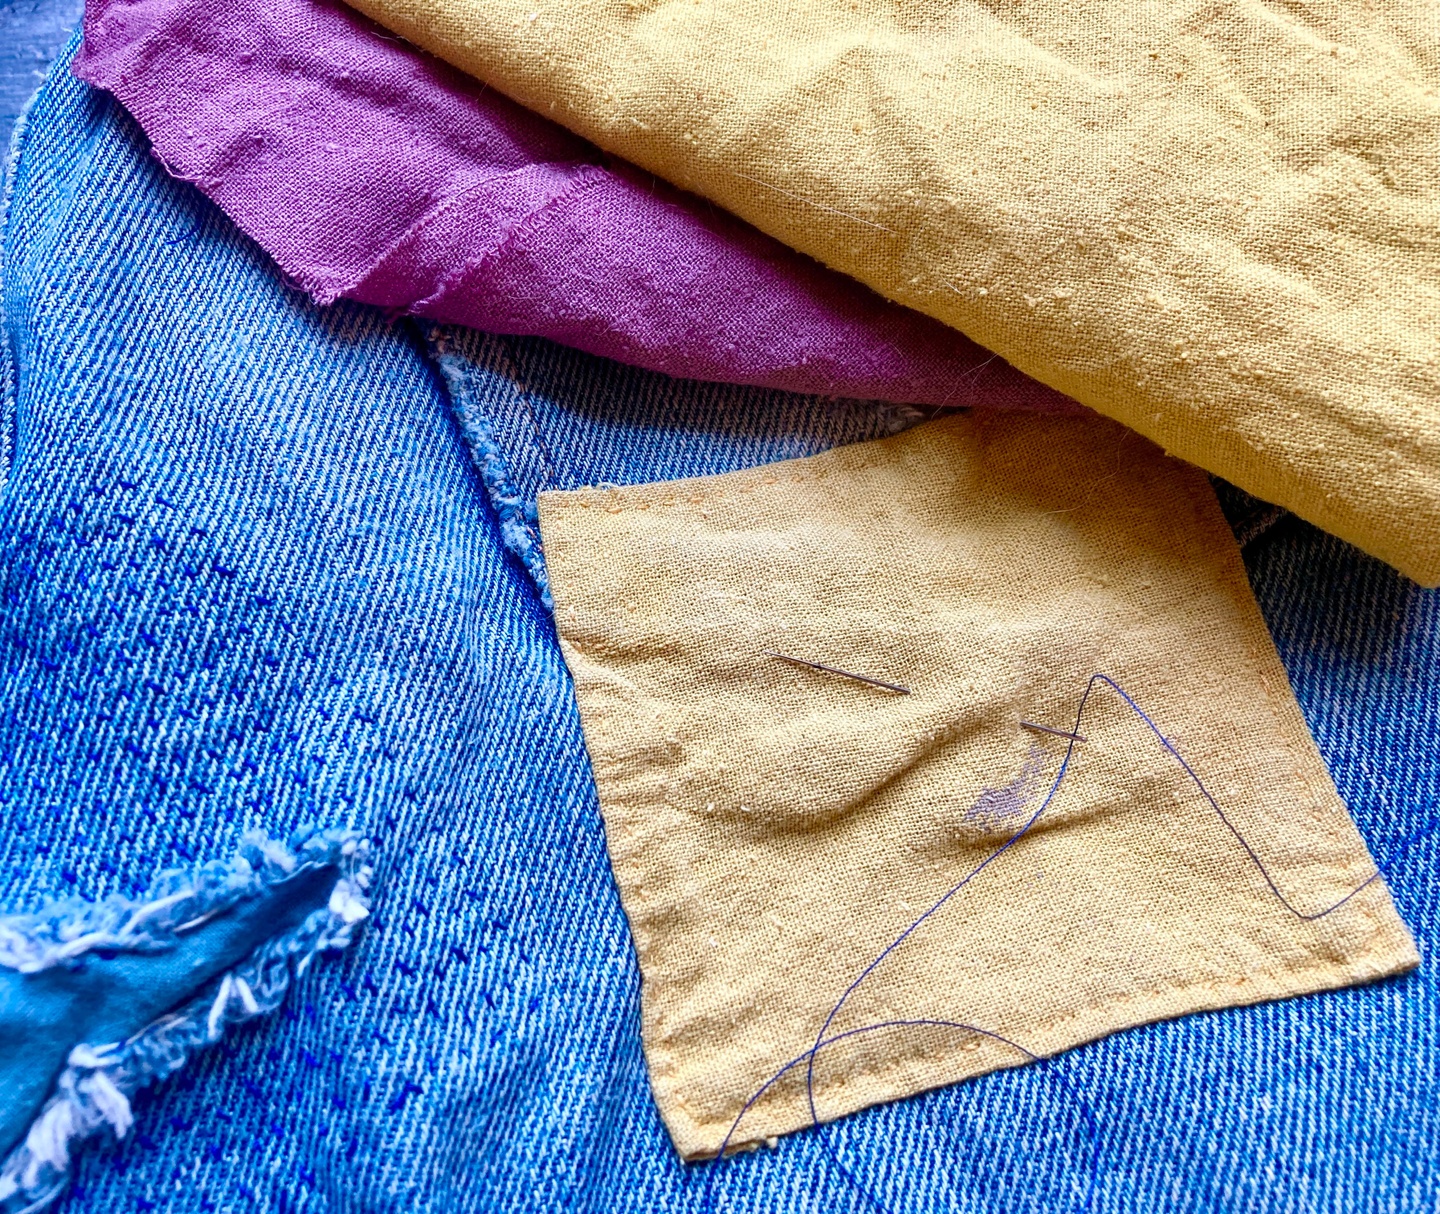 Scraps of denim, yellow, and purple mended fabric